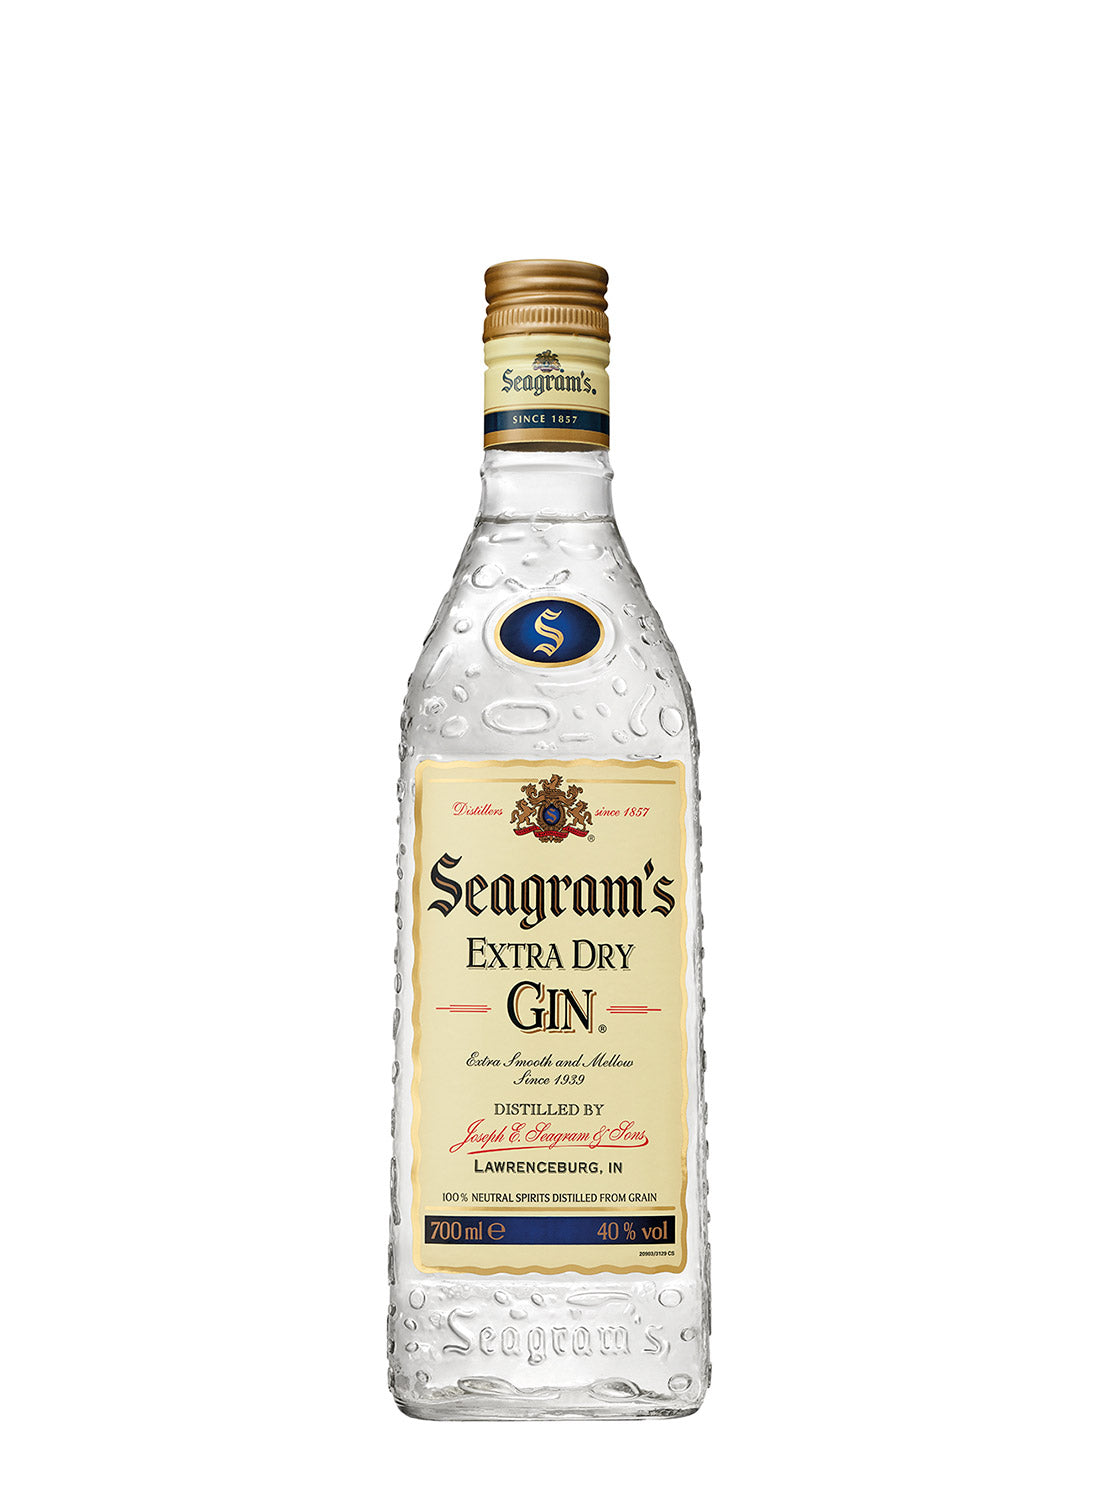 GINEBRA SEAGRAMS EXTRA DRY GIN 70 CL